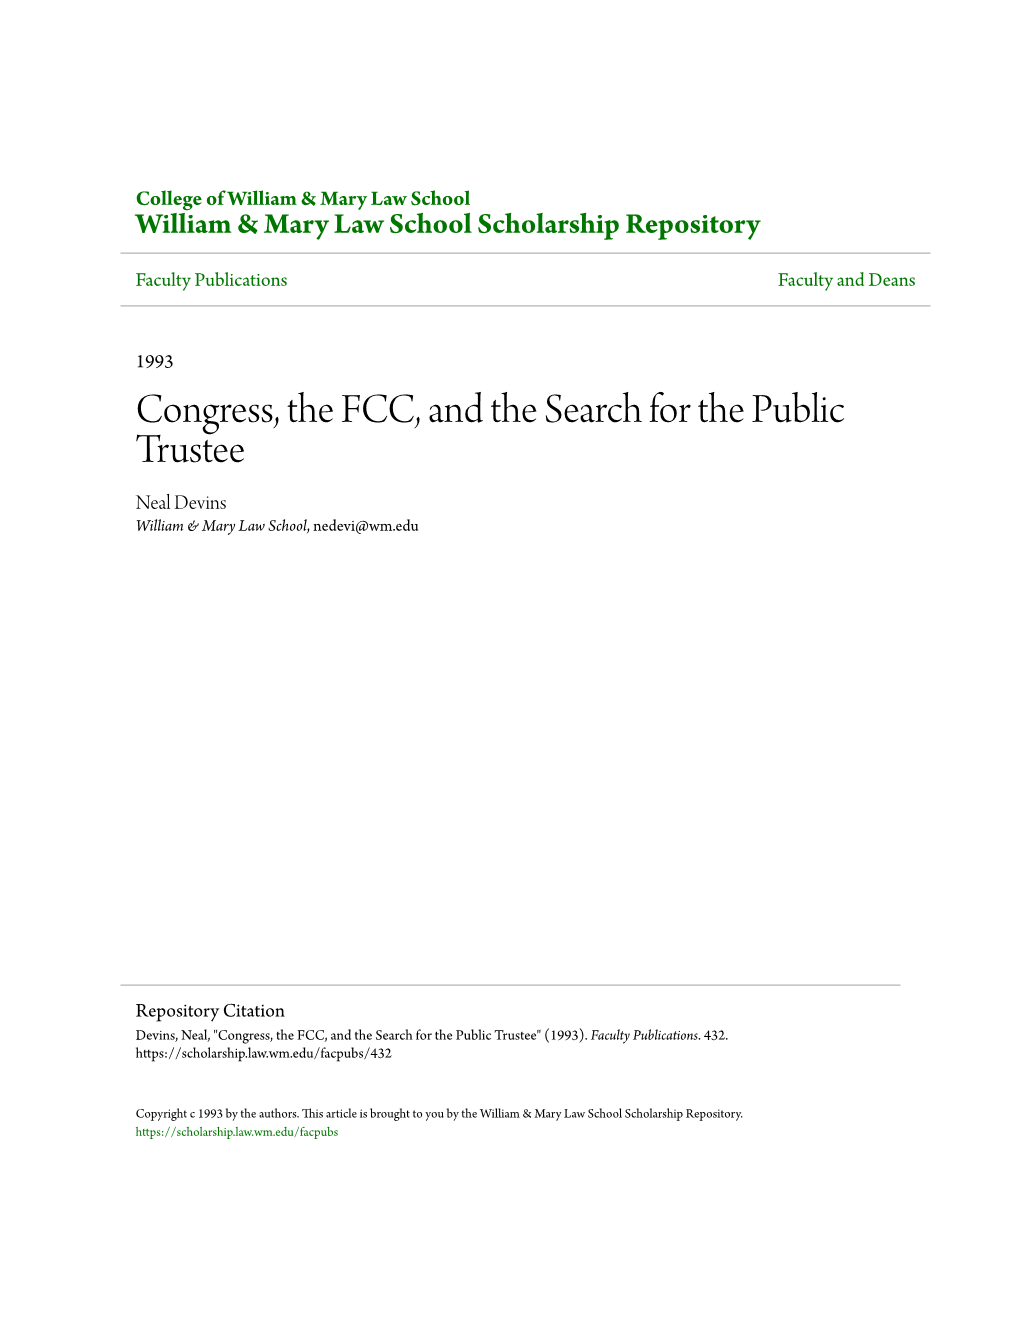 Congress, the FCC, and the Search for the Public Trustee Neal Devins William & Mary Law School, Nedevi@Wm.Edu